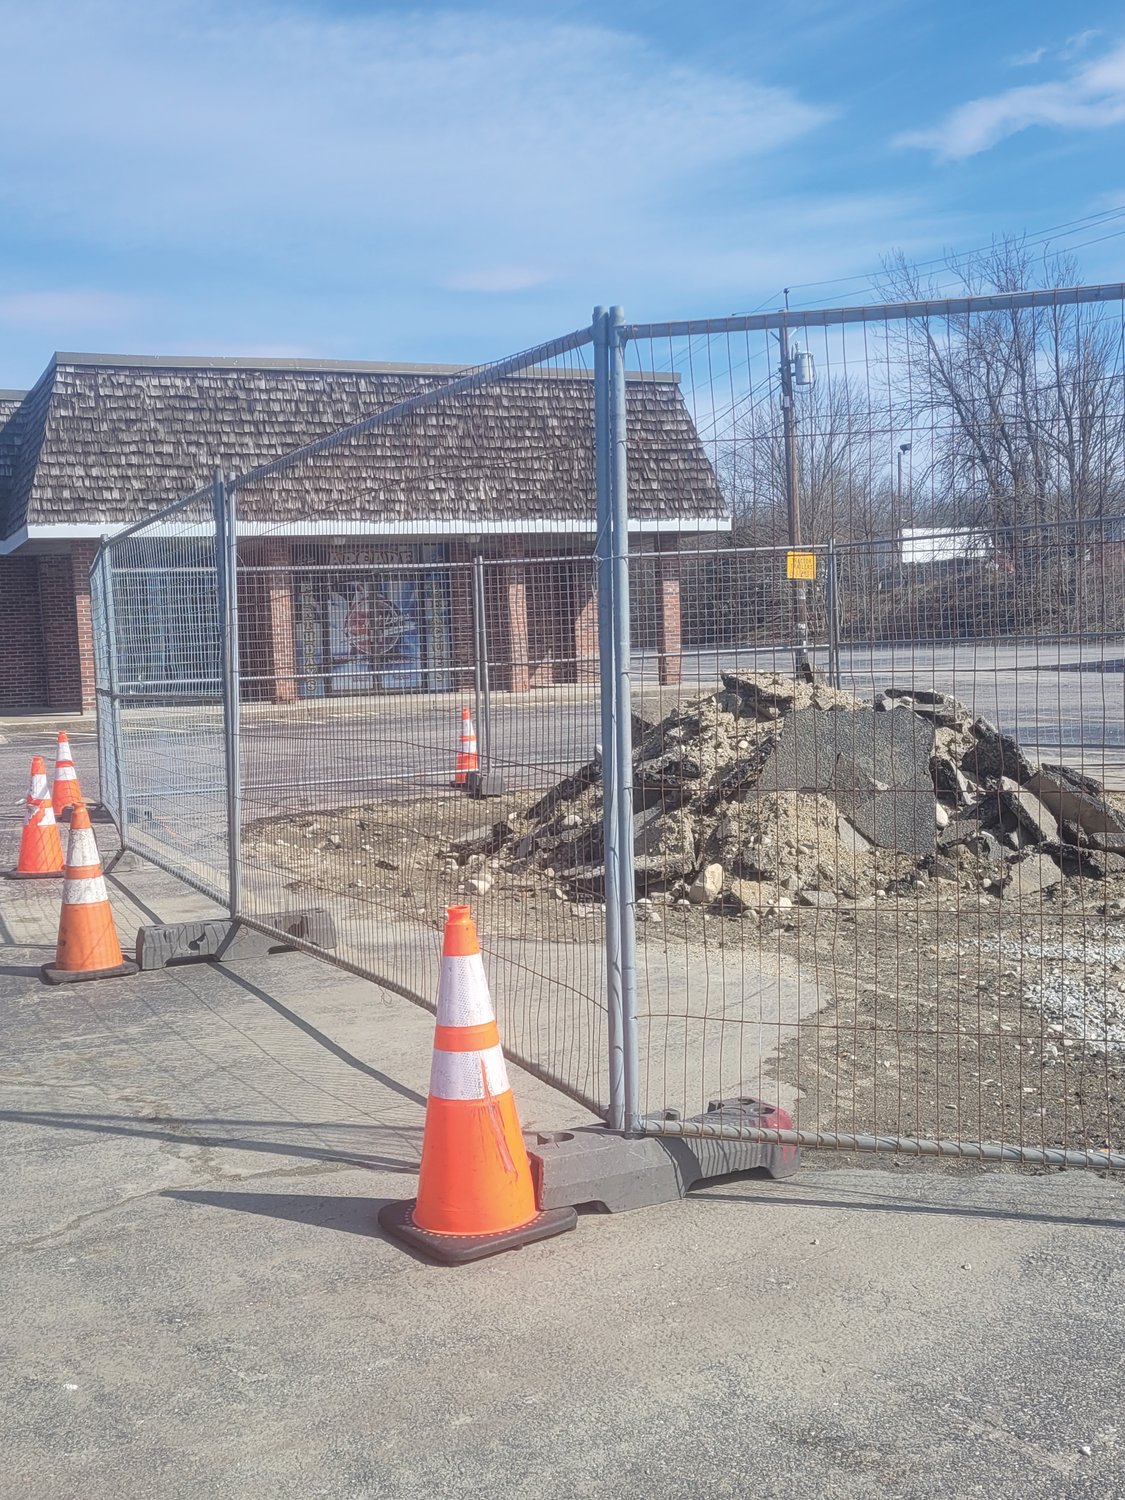 WATER WORKS: An employee at Town Hall lanes said the bowling alley will be without water for months as they construct a new bank branch building along Atwood Avenue. Because of the utility work, the bowling alley will shut its doors forever in a few weeks.